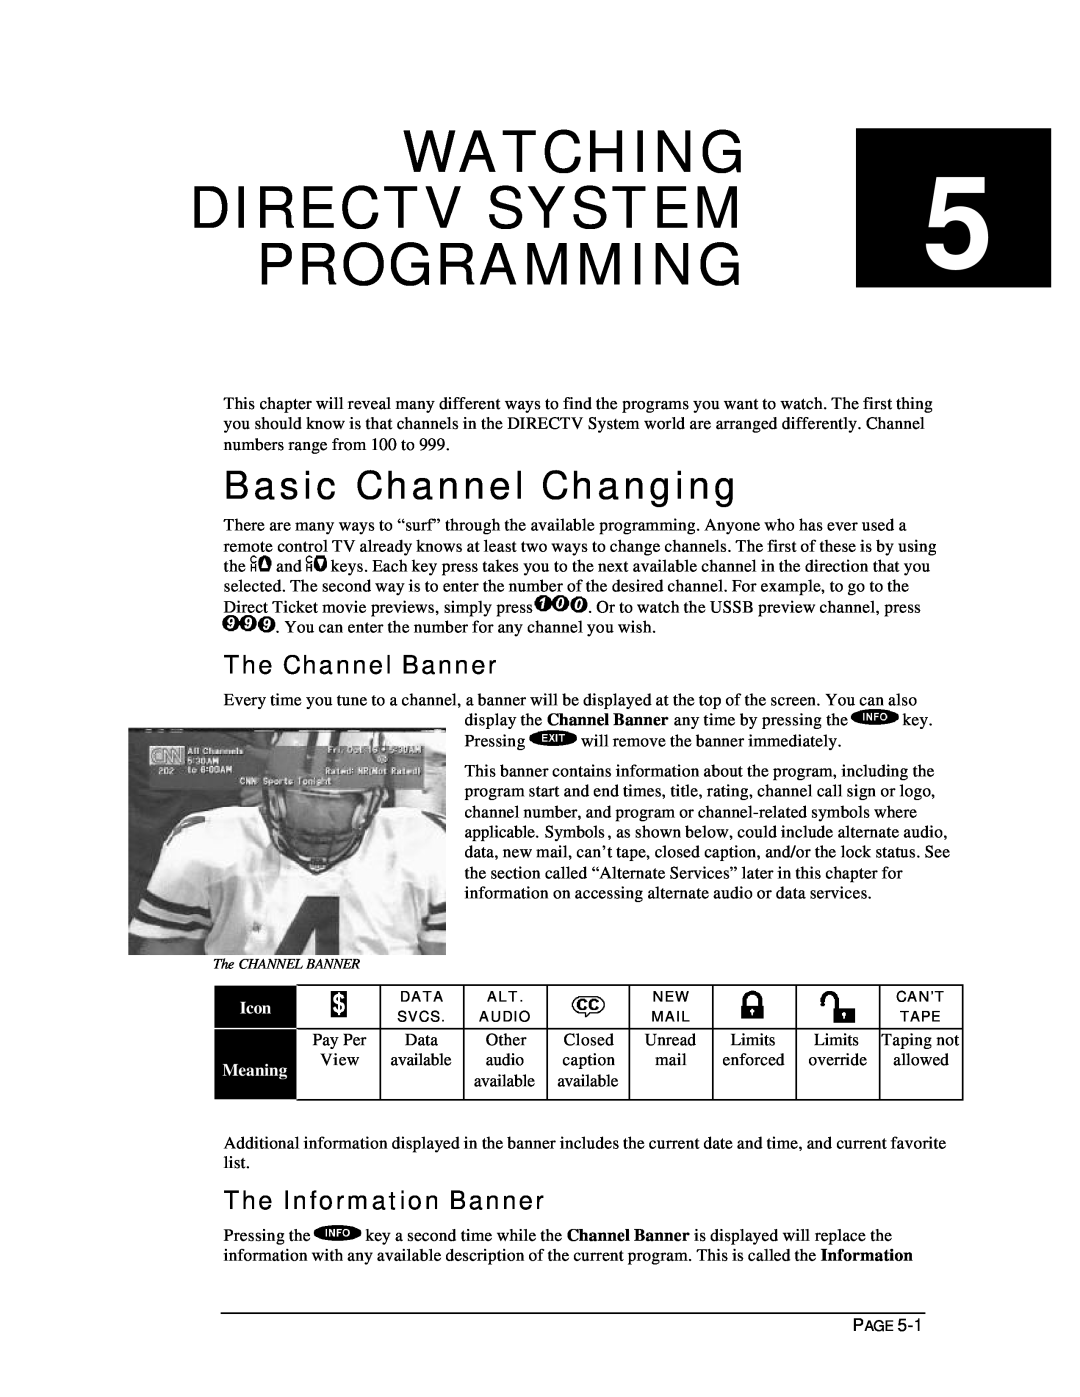 DirecTV HIRD-D11 WATCHING DIRECTV SYSTEM 5 PROGRAMMING, Basic Channel Changing, The Channel Banner, The Information Banner 